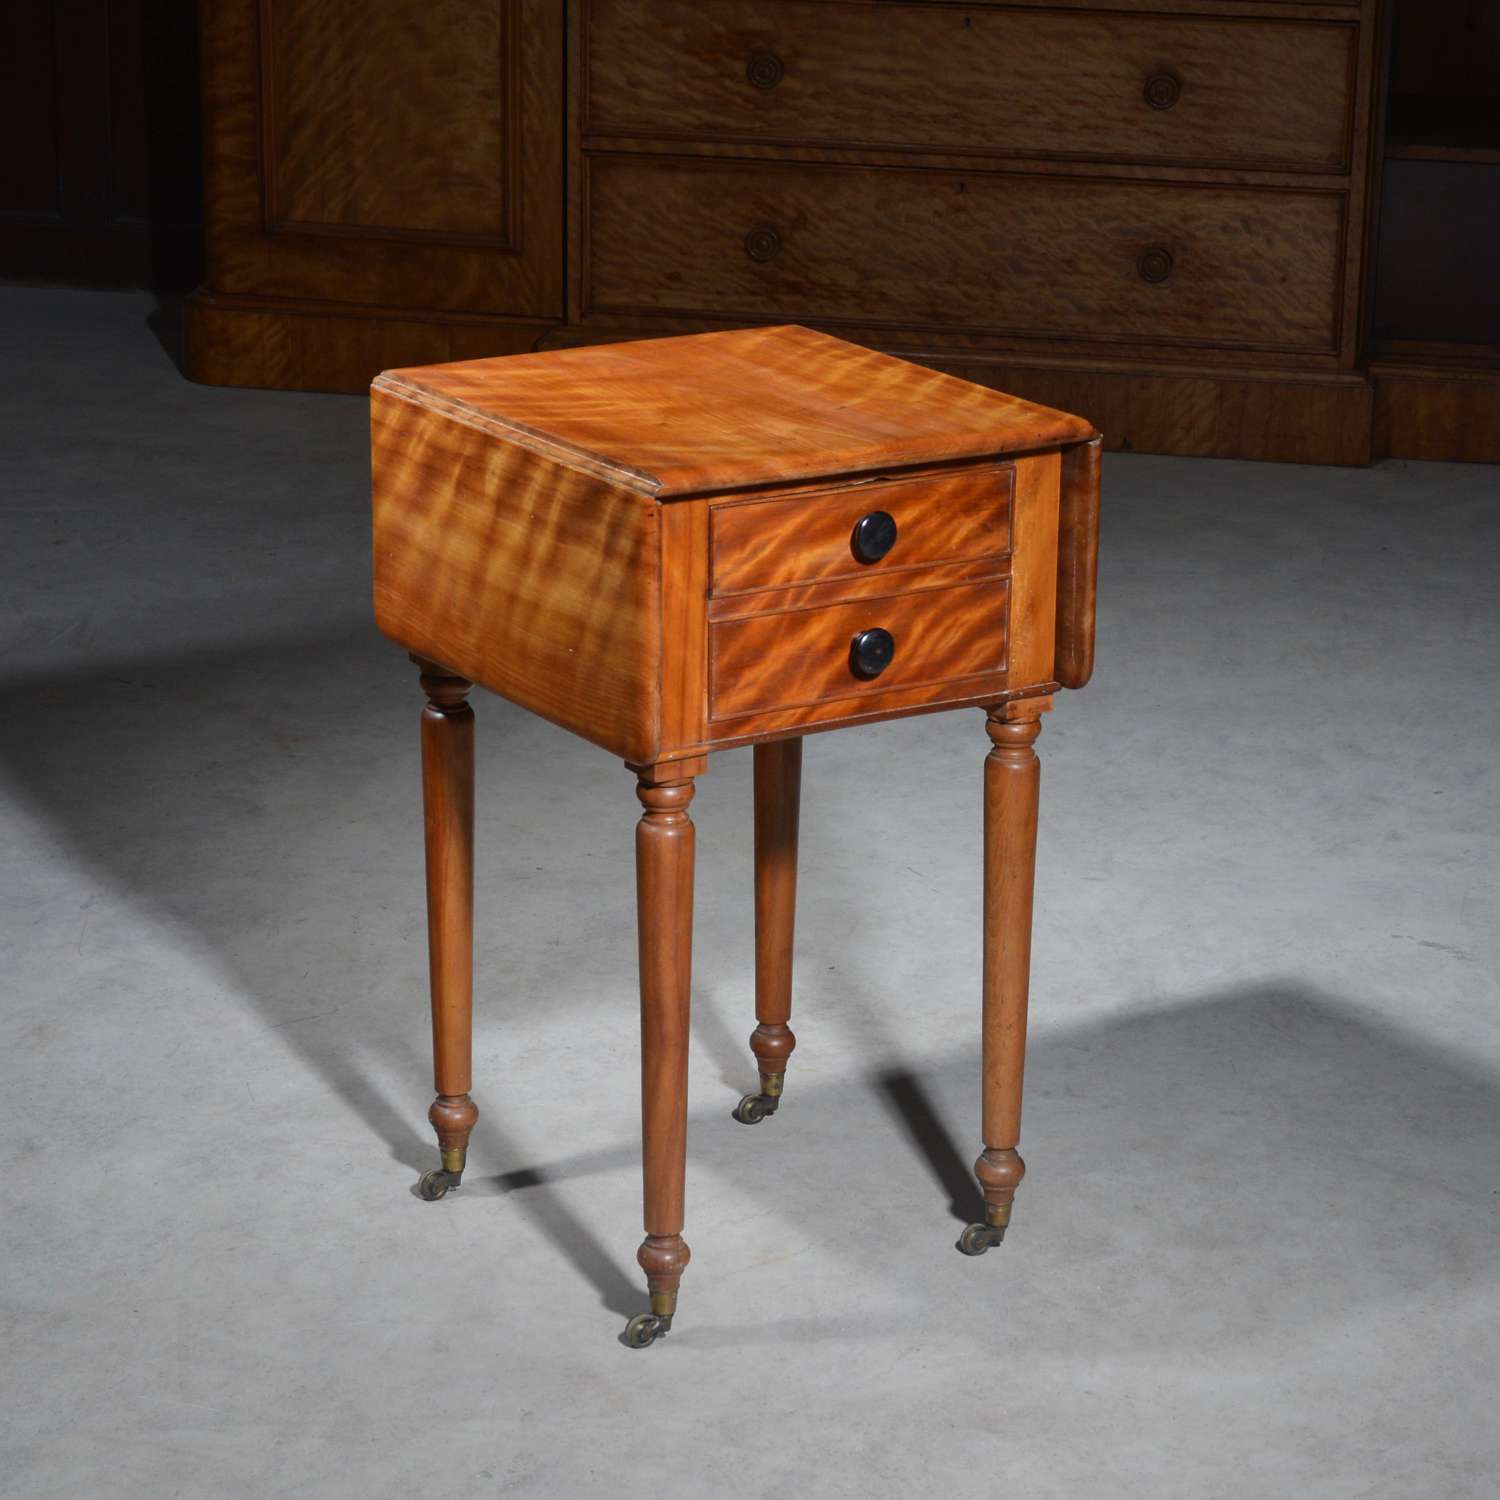 Satin Birch Bedside Table, or Lamp Table